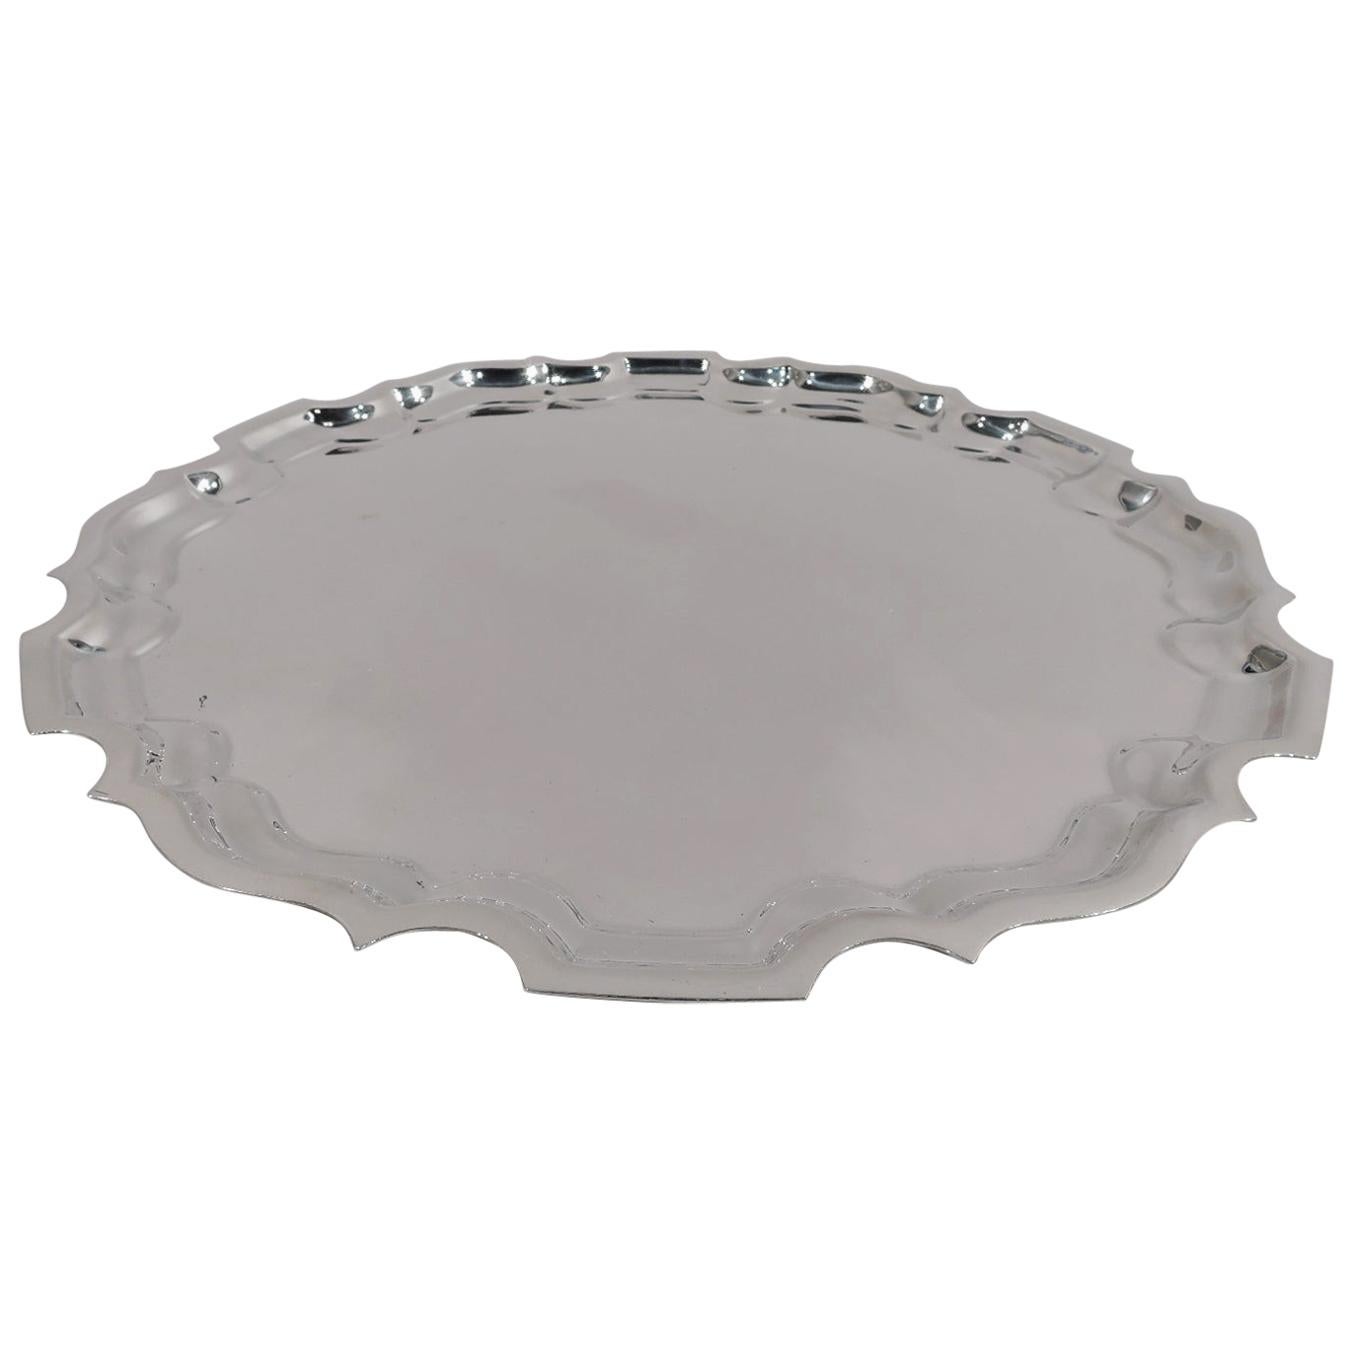 Traditional and Heavy Sterling Silver Tray with Georgian Piecrust Rim